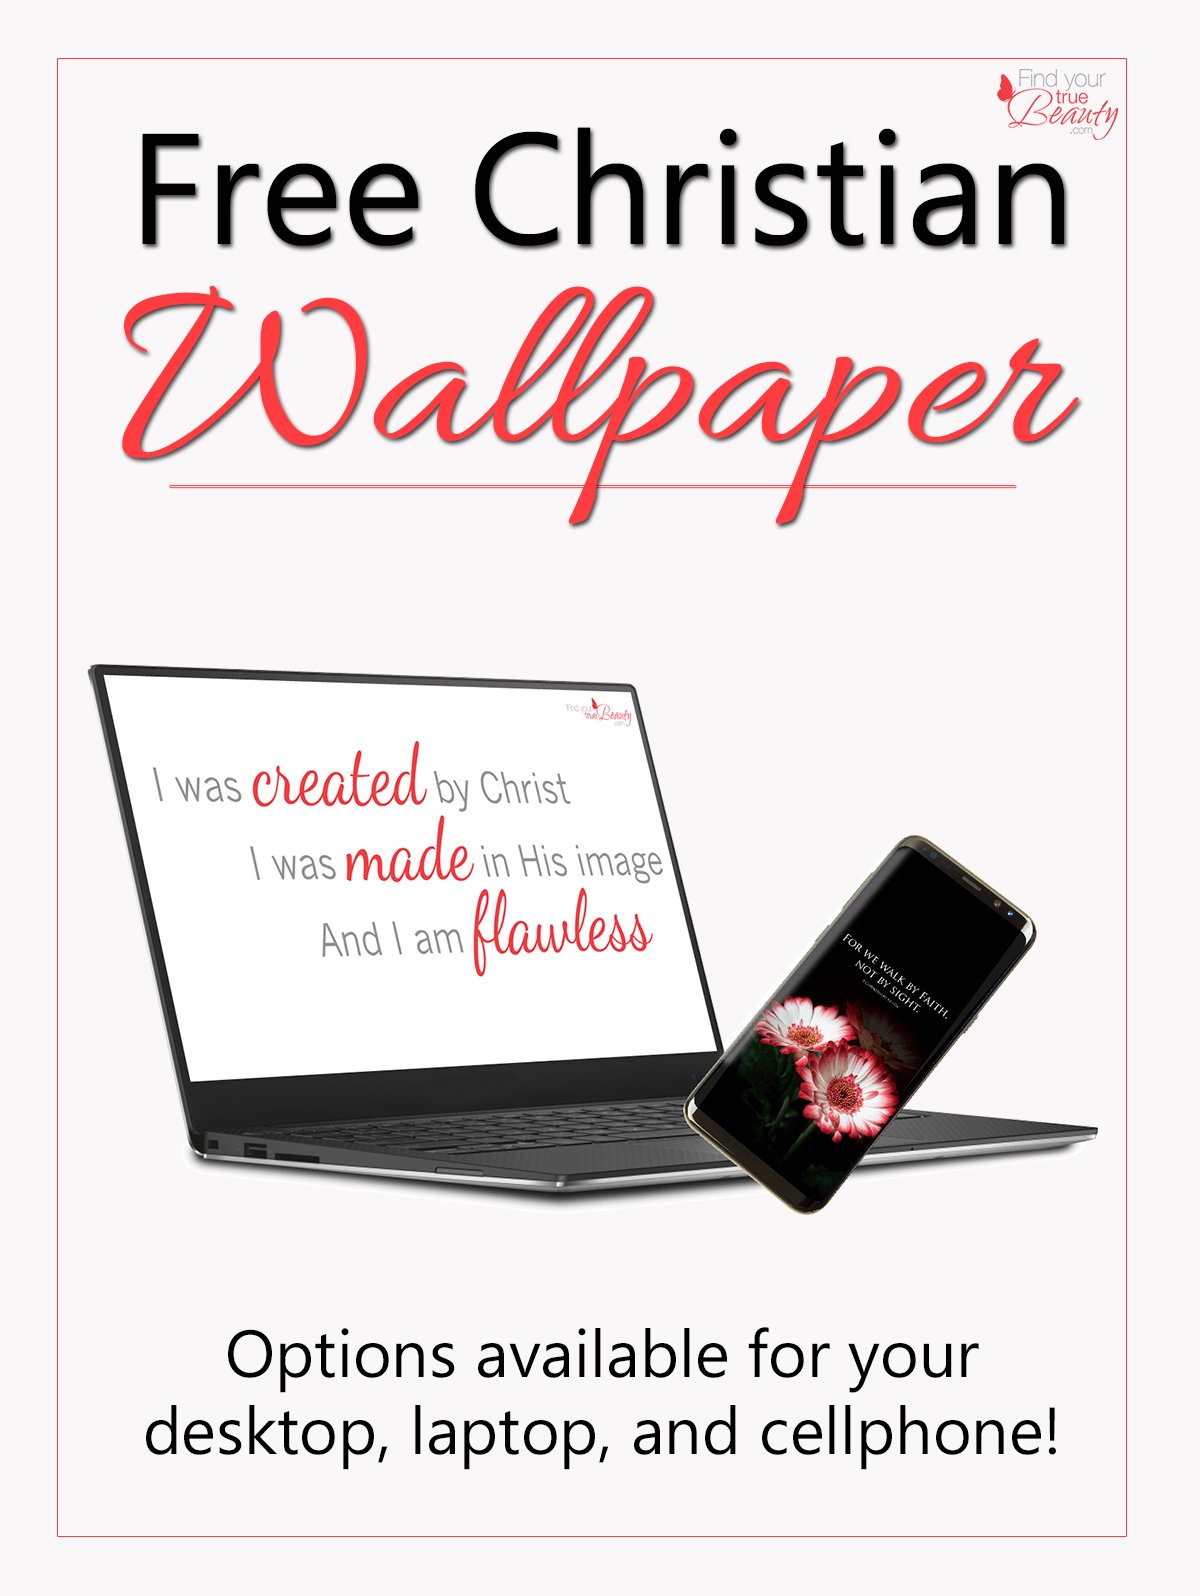 Check out this free Christian wallpaper